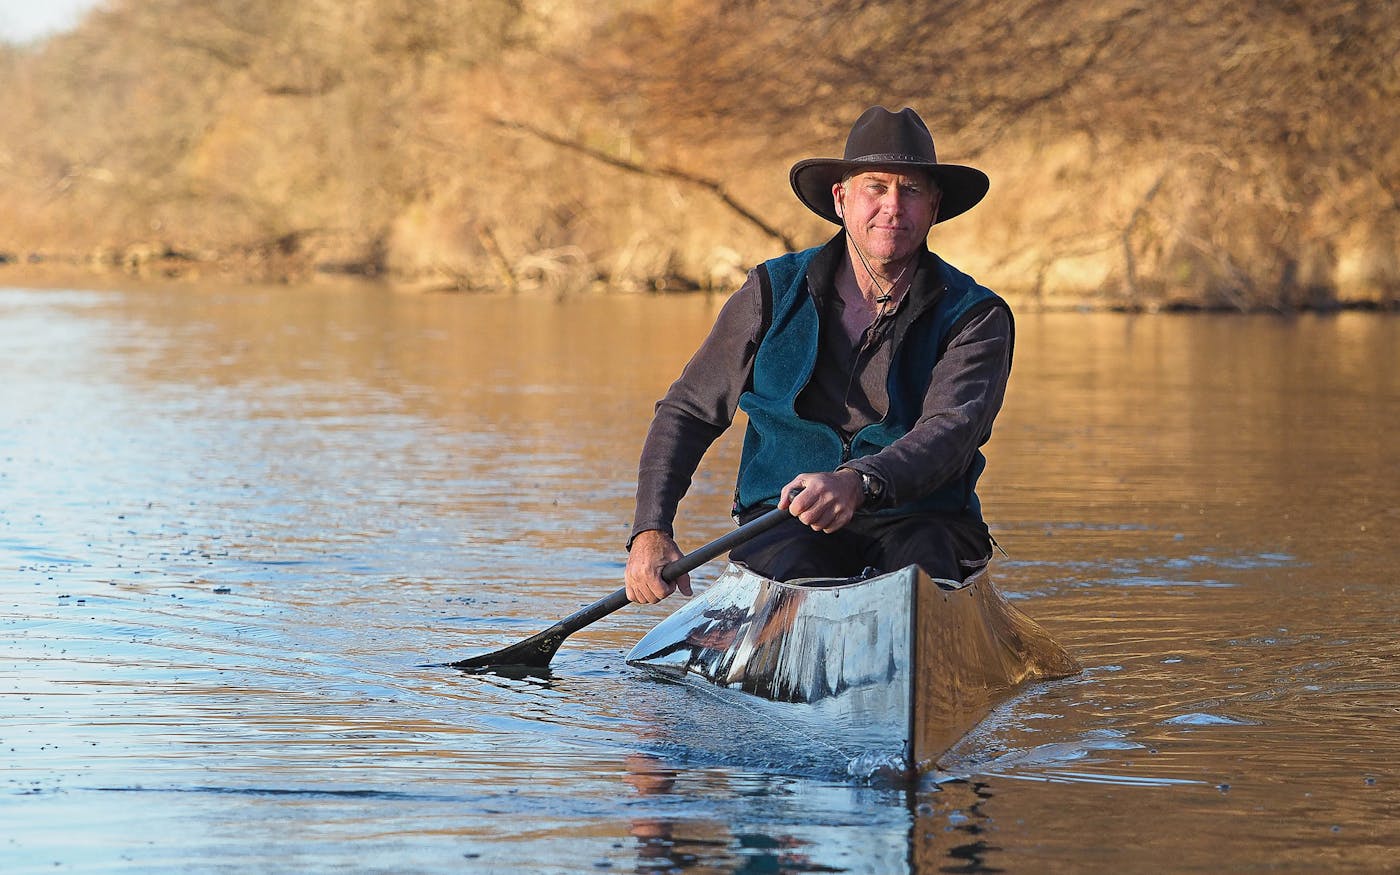 Texas's Craziest Endurance Paddler Is Taking on His Biggest